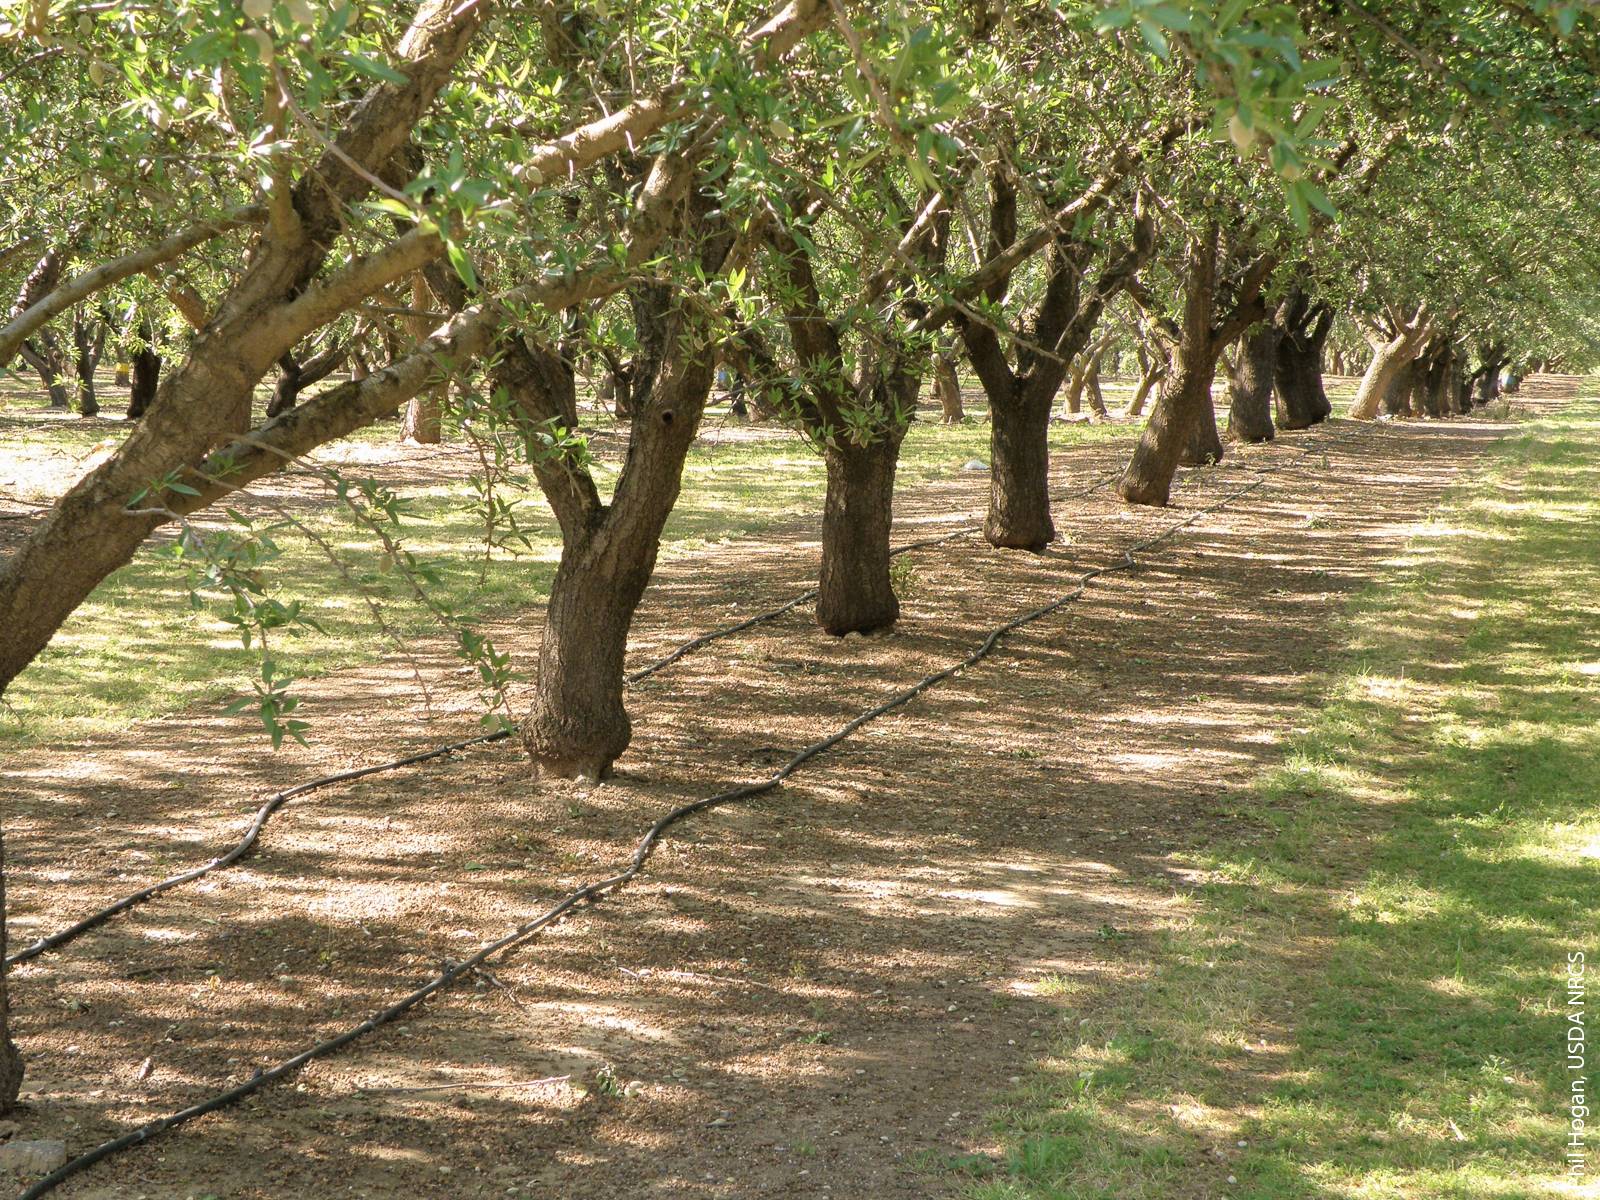 Some farmers in the study expressed concern about an increase in high-value orchard crops in previously uncultivated areas, which they felt had increased overall water application in the region and contributed to increases in the price of agricultural land.